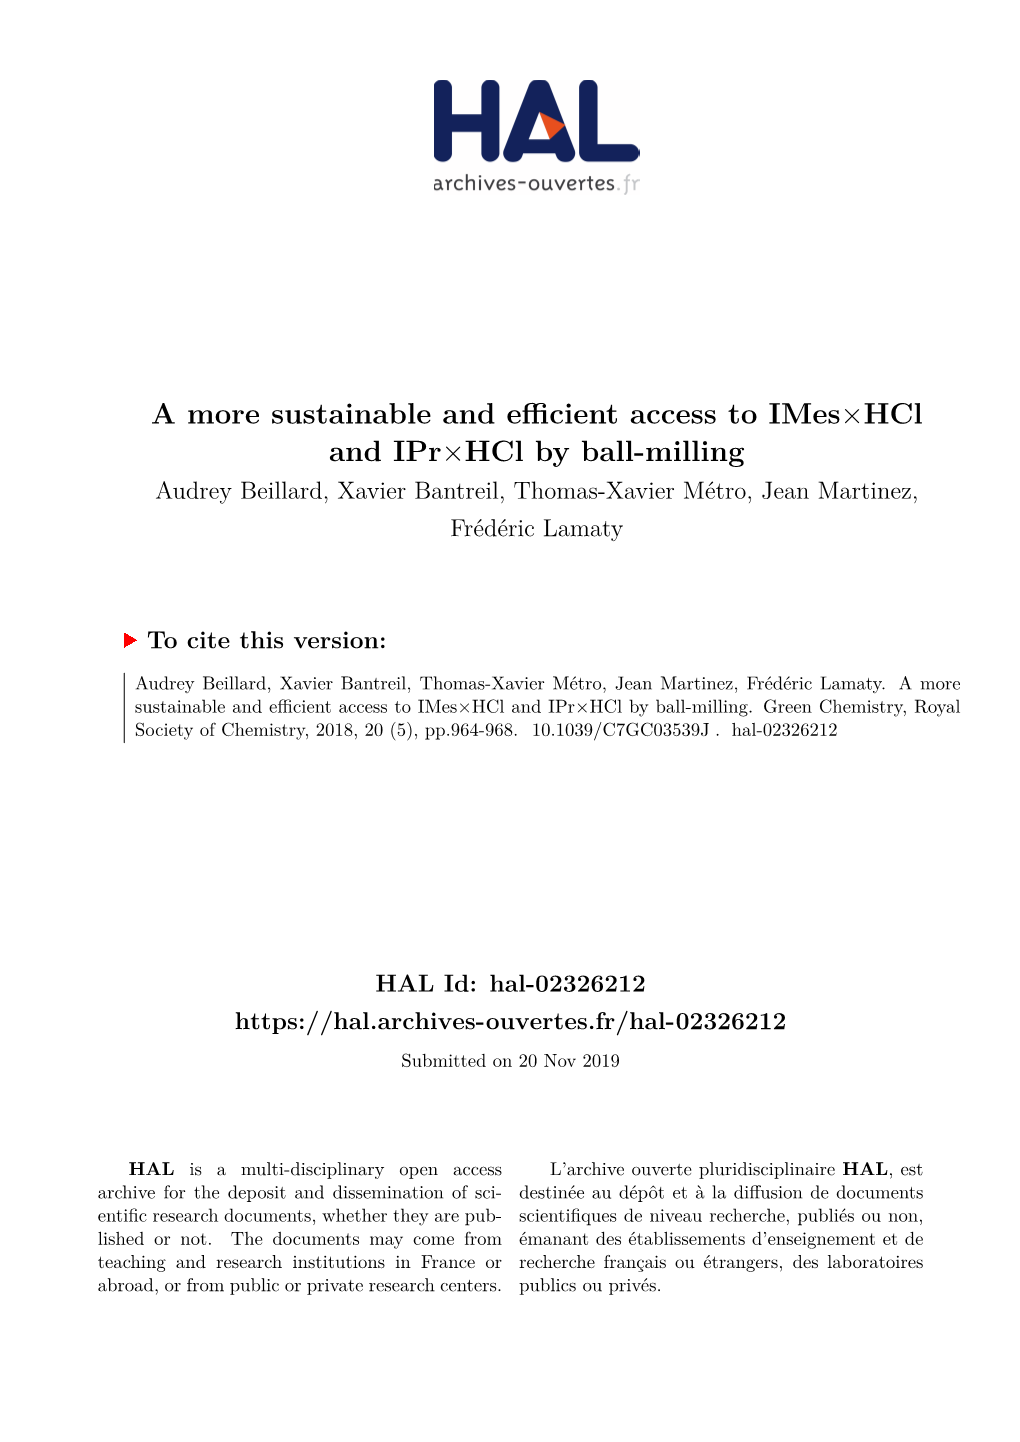 A More Sustainable and Efficient Access to Imeshcl and Iprhcl by Ball-Milling